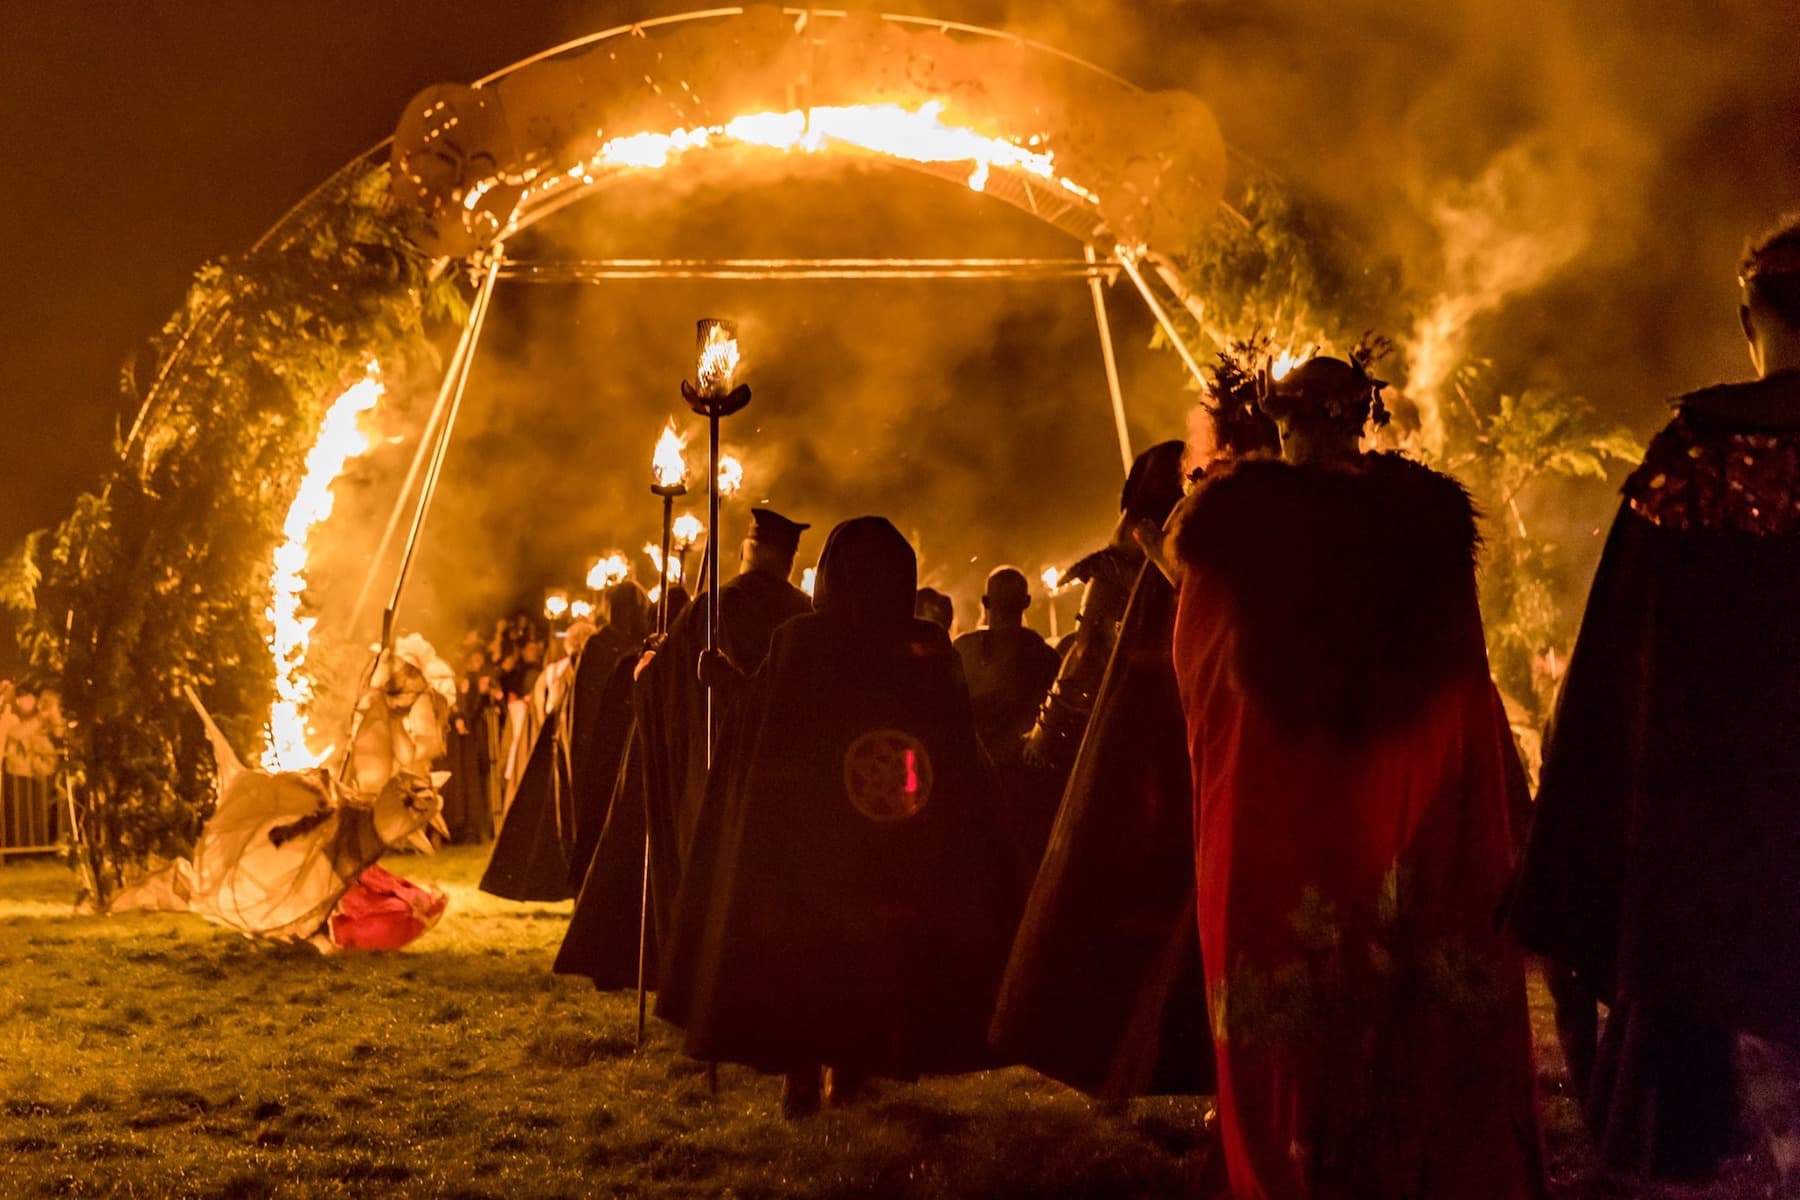 Group of people wearing various hooded costumes marching through and archway of fire carrying medieval torches